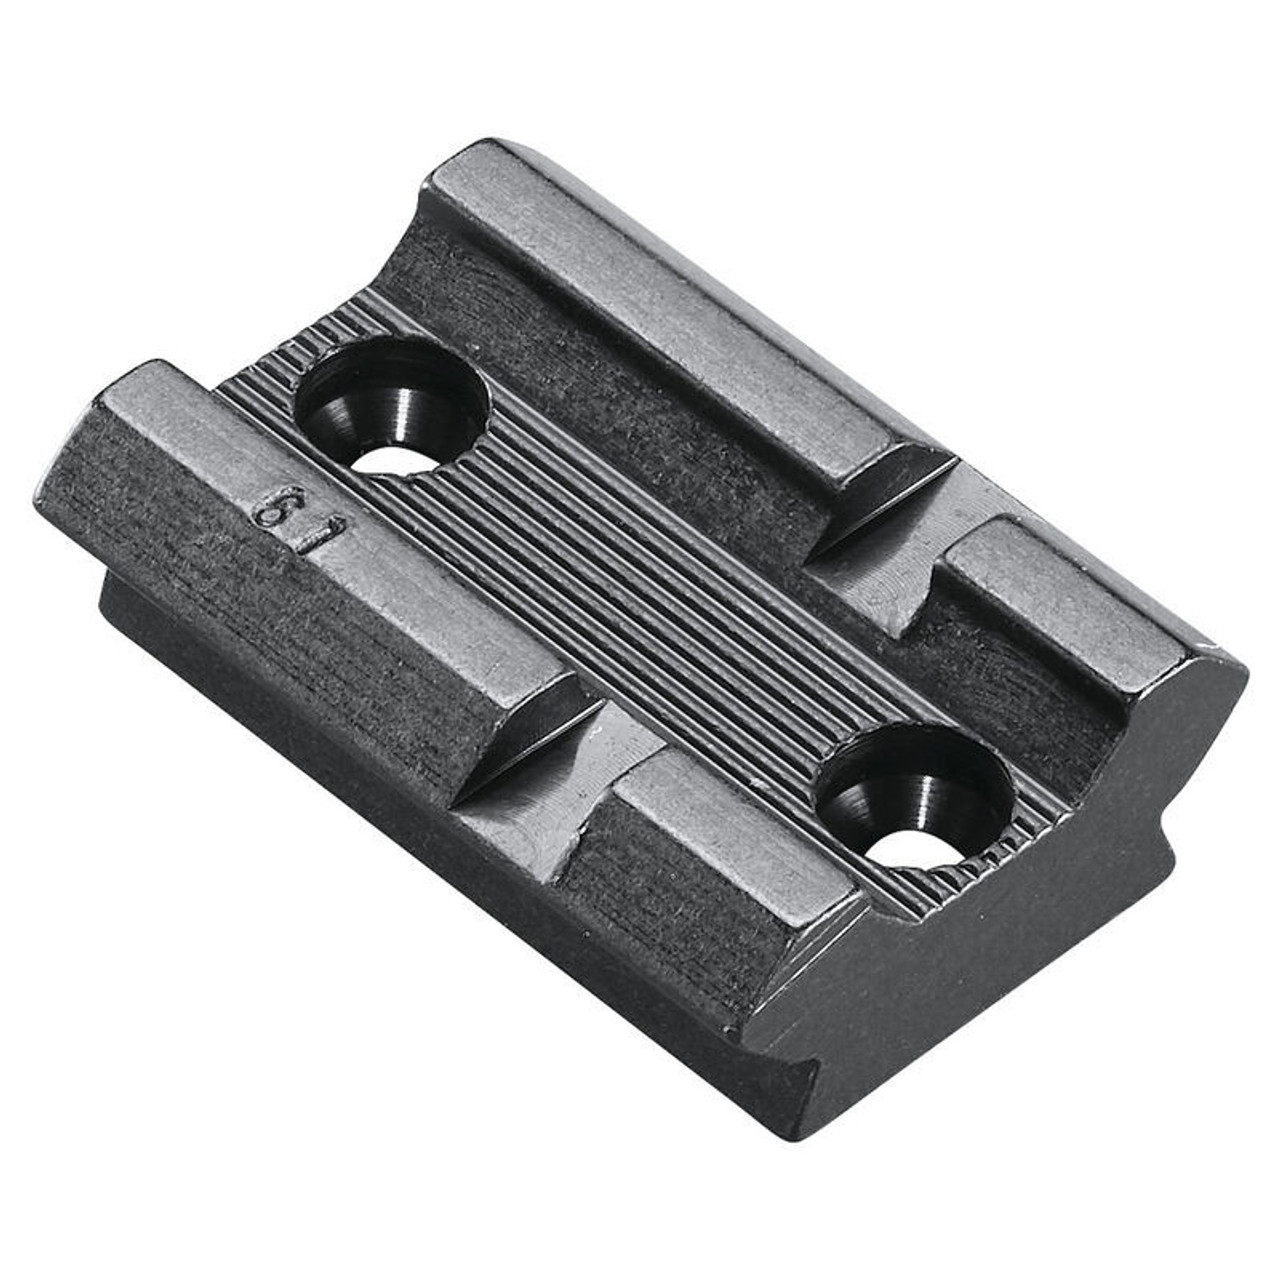 Each Weaver #61M Top Mount base is machined to tight tolerances for a custom fit. These aluminum bases offer maximum strength for rings to hold tight.

Please visit Weaver's Mounts Chart to see which bases fit your rifle.

FEATURES
Machined to tight tolerances for a custom fit
Offer the rock solid Weaver cross-lock design to fit a variety of rings
Made in America